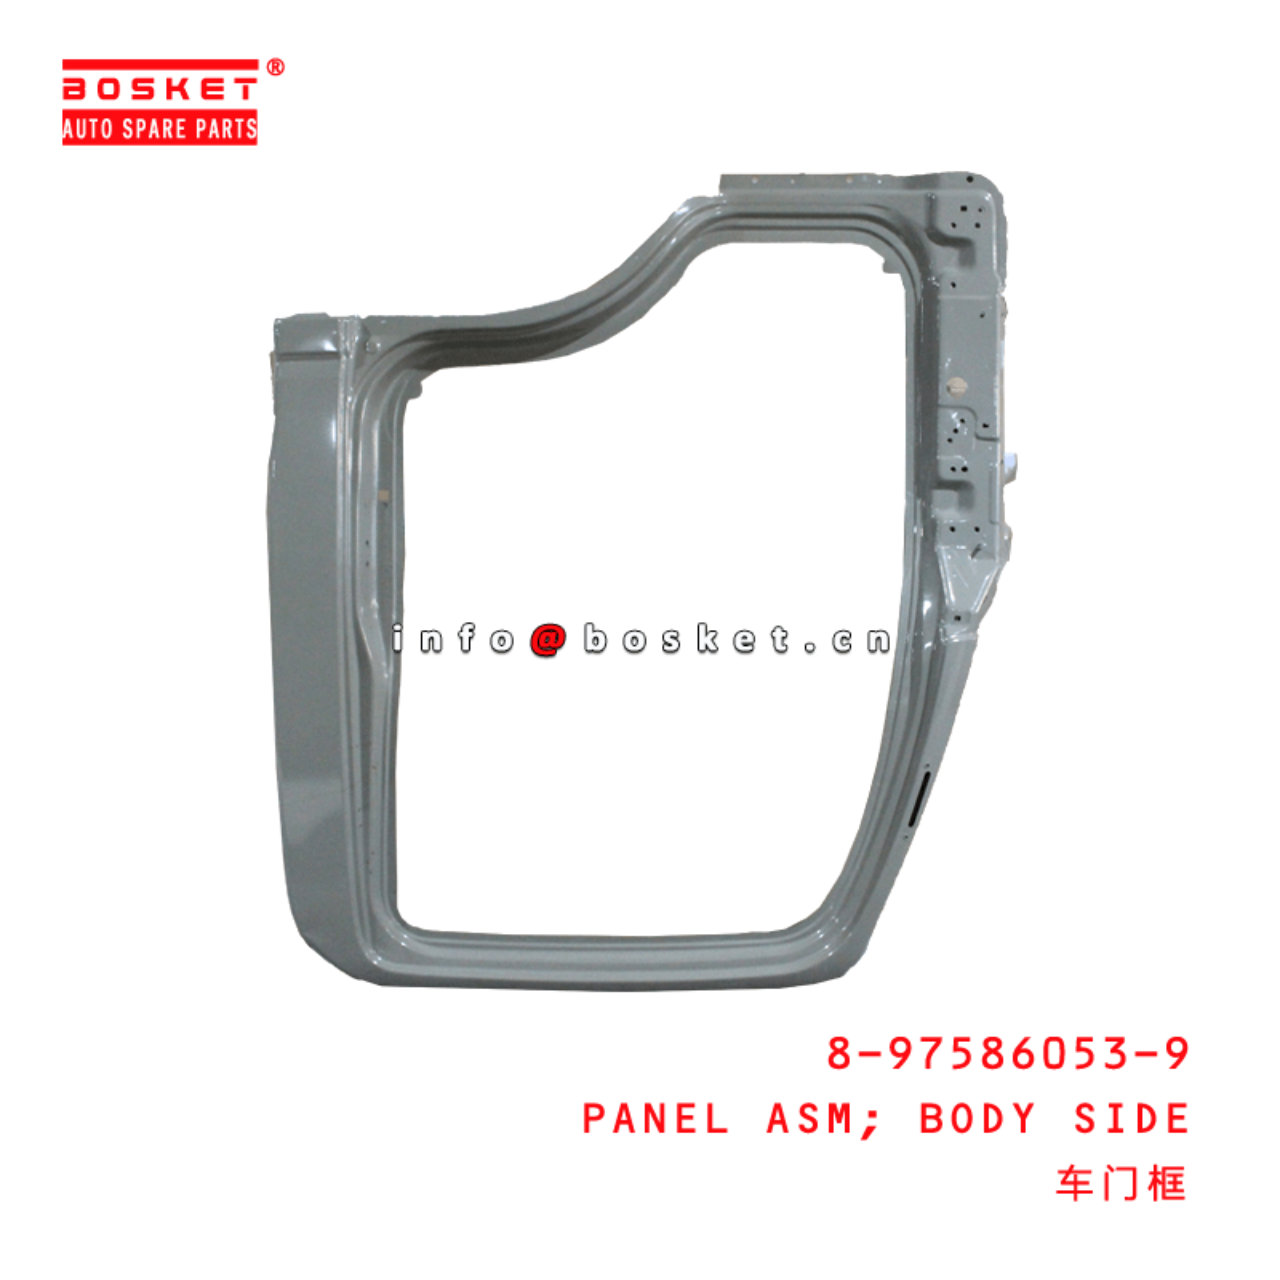  8-97586053-9 Body Side Panel Assembly 8975860539 Suitable for ISUZU NPR75 NLR85 NMR85 700P 